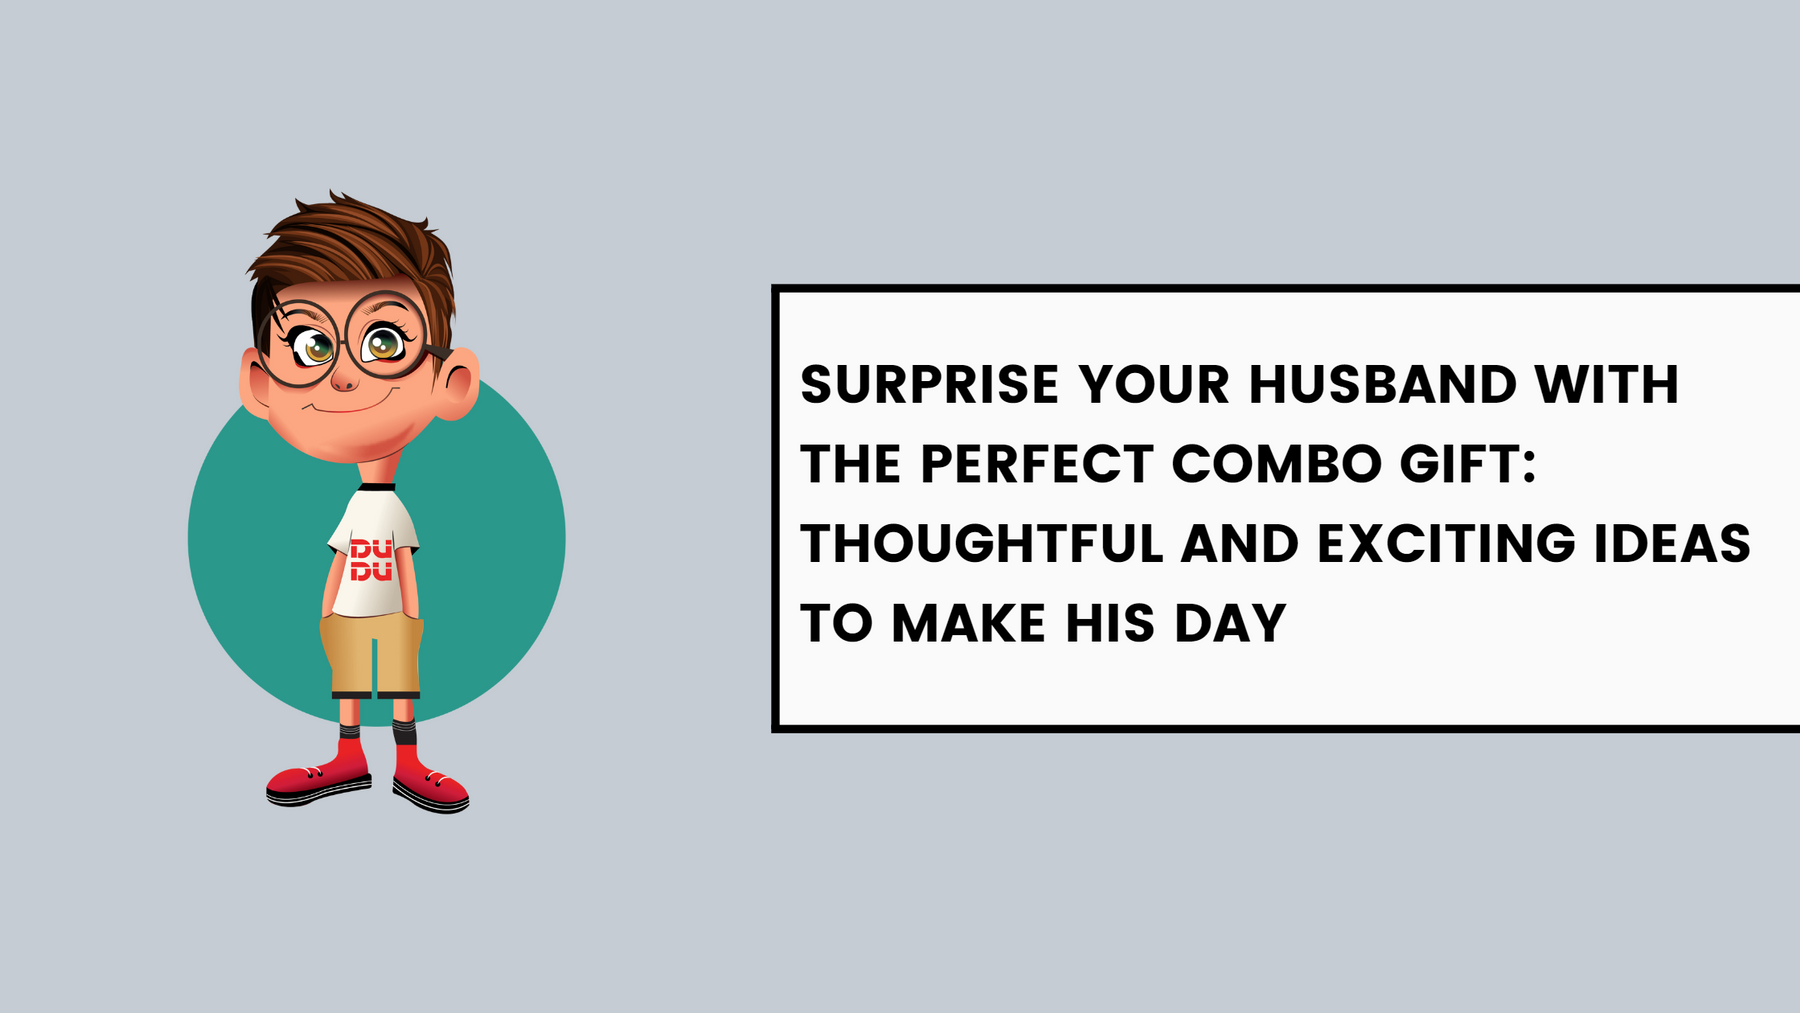 Surprise Your Husband with the Perfect Combo Gift: Thoughtful and Exciting Ideas to Make His Day